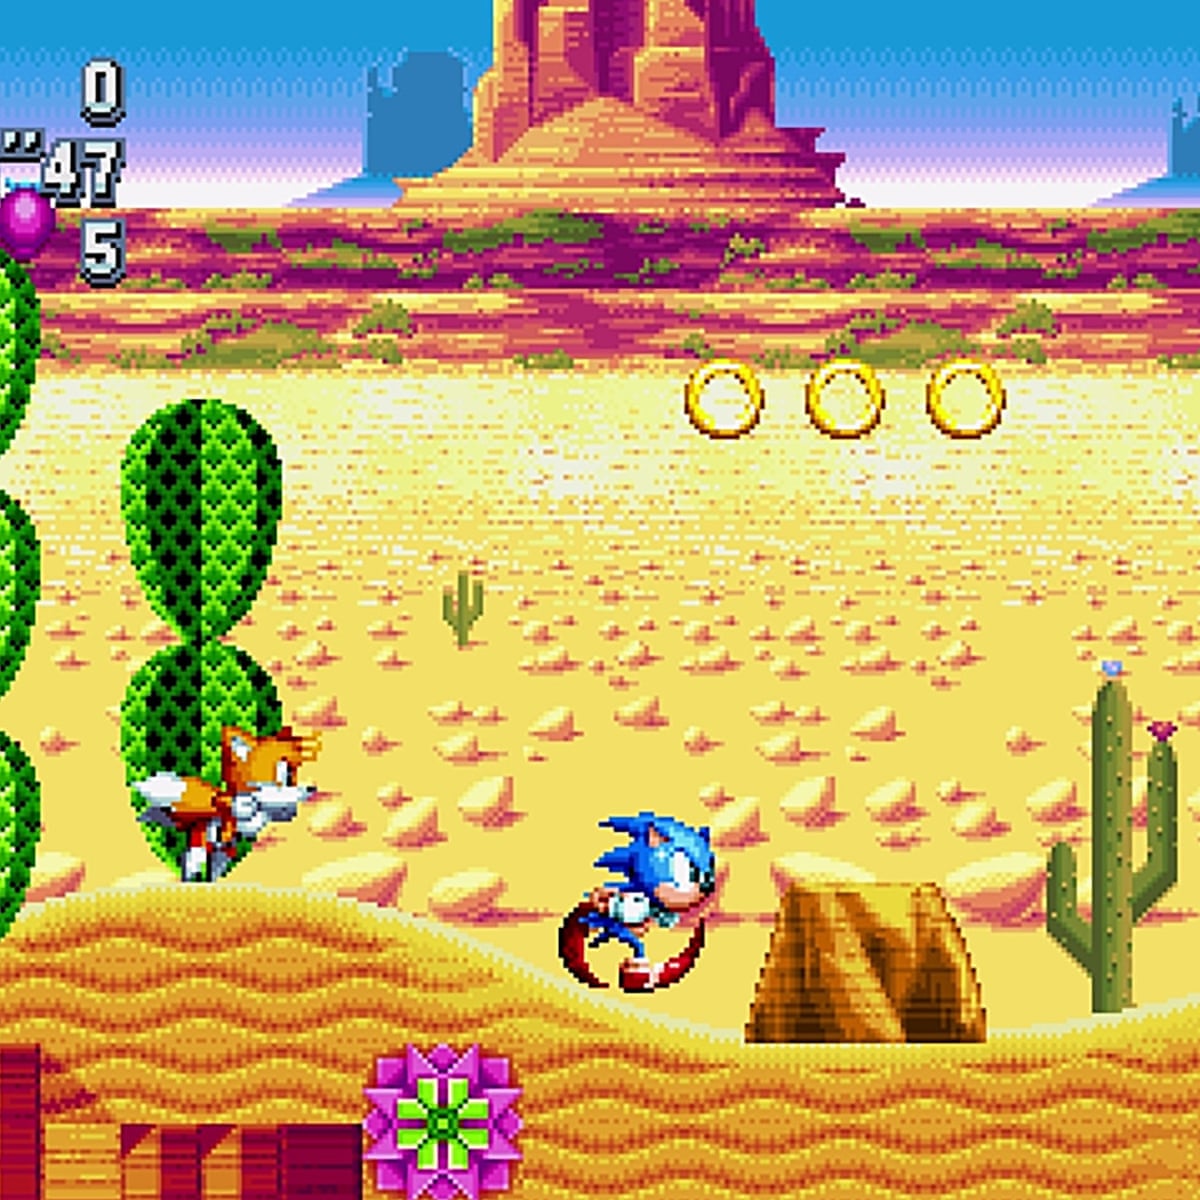 Sonic Mania (2017), PS4 Game